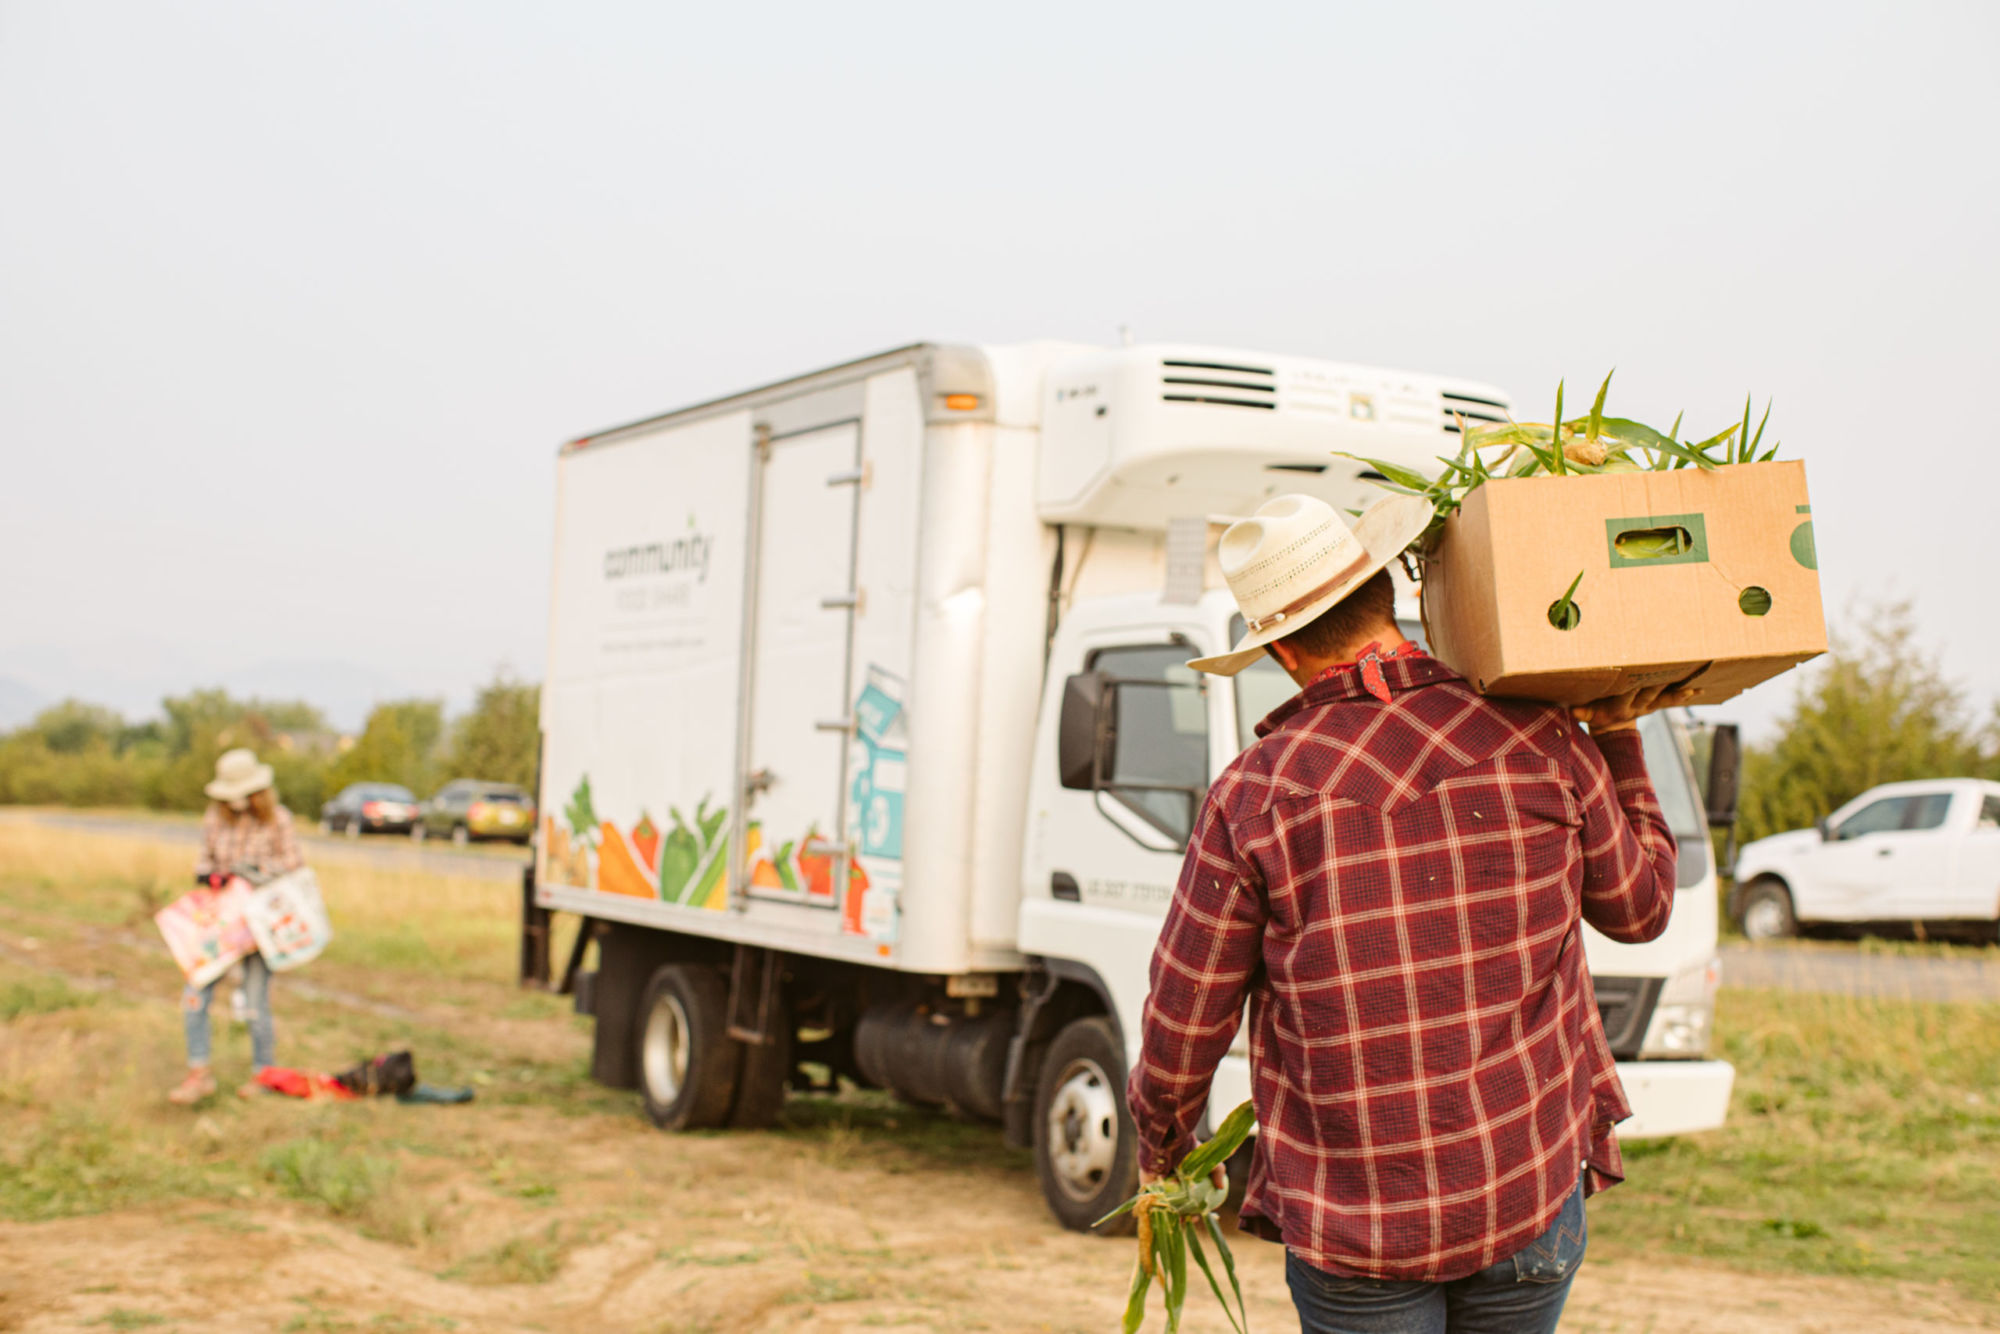 A volunteer carries a box of gleaned produce to a truck.